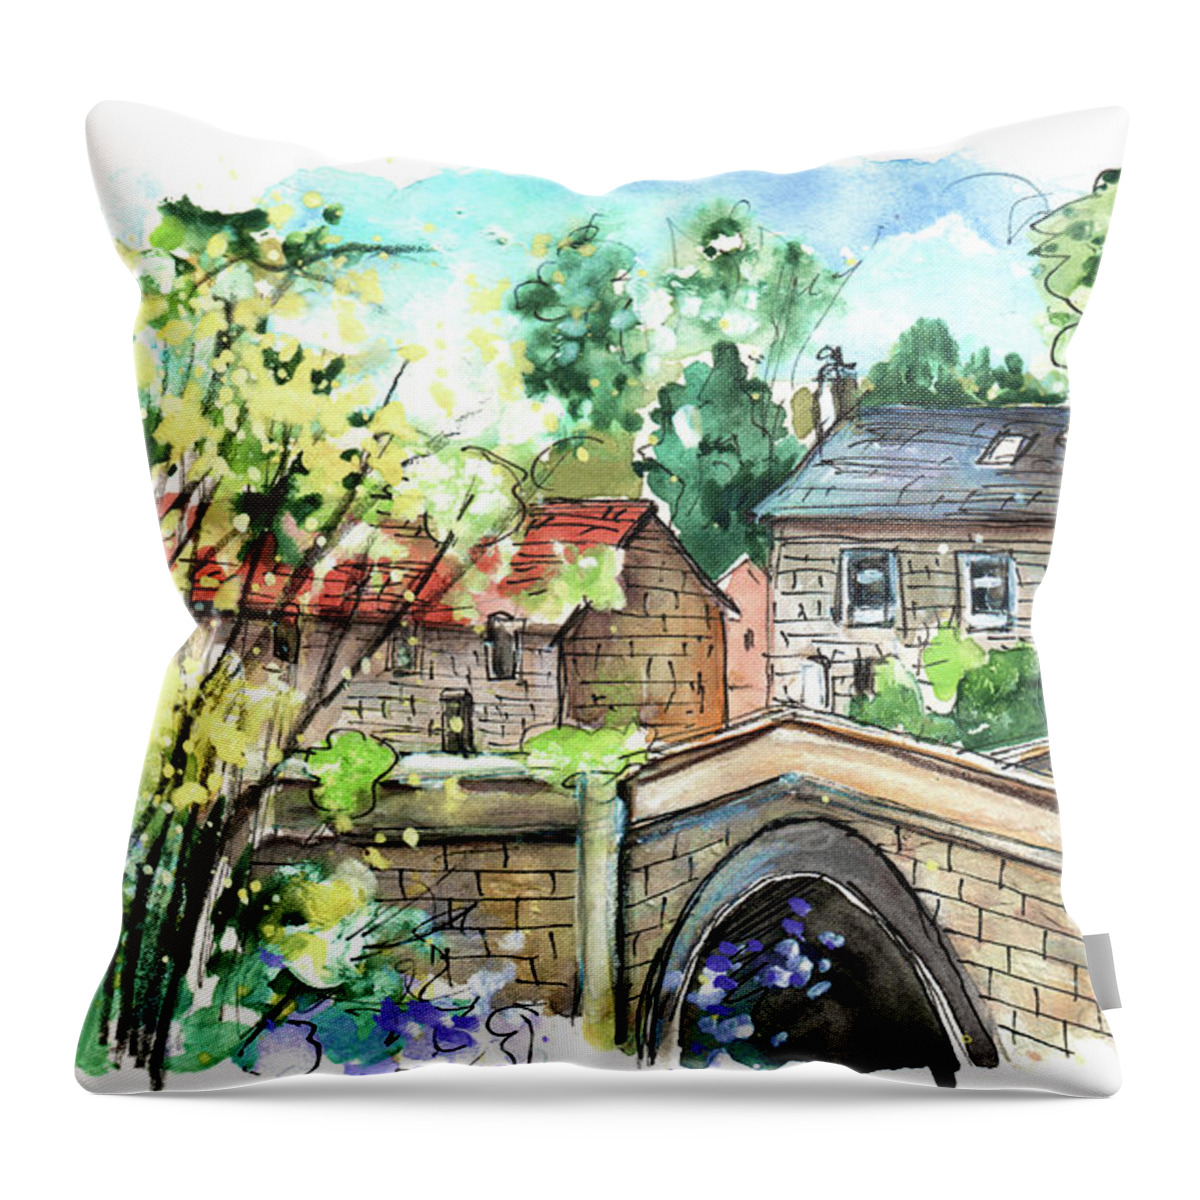 Travel Throw Pillow featuring the painting Lealholm 01 by Miki De Goodaboom